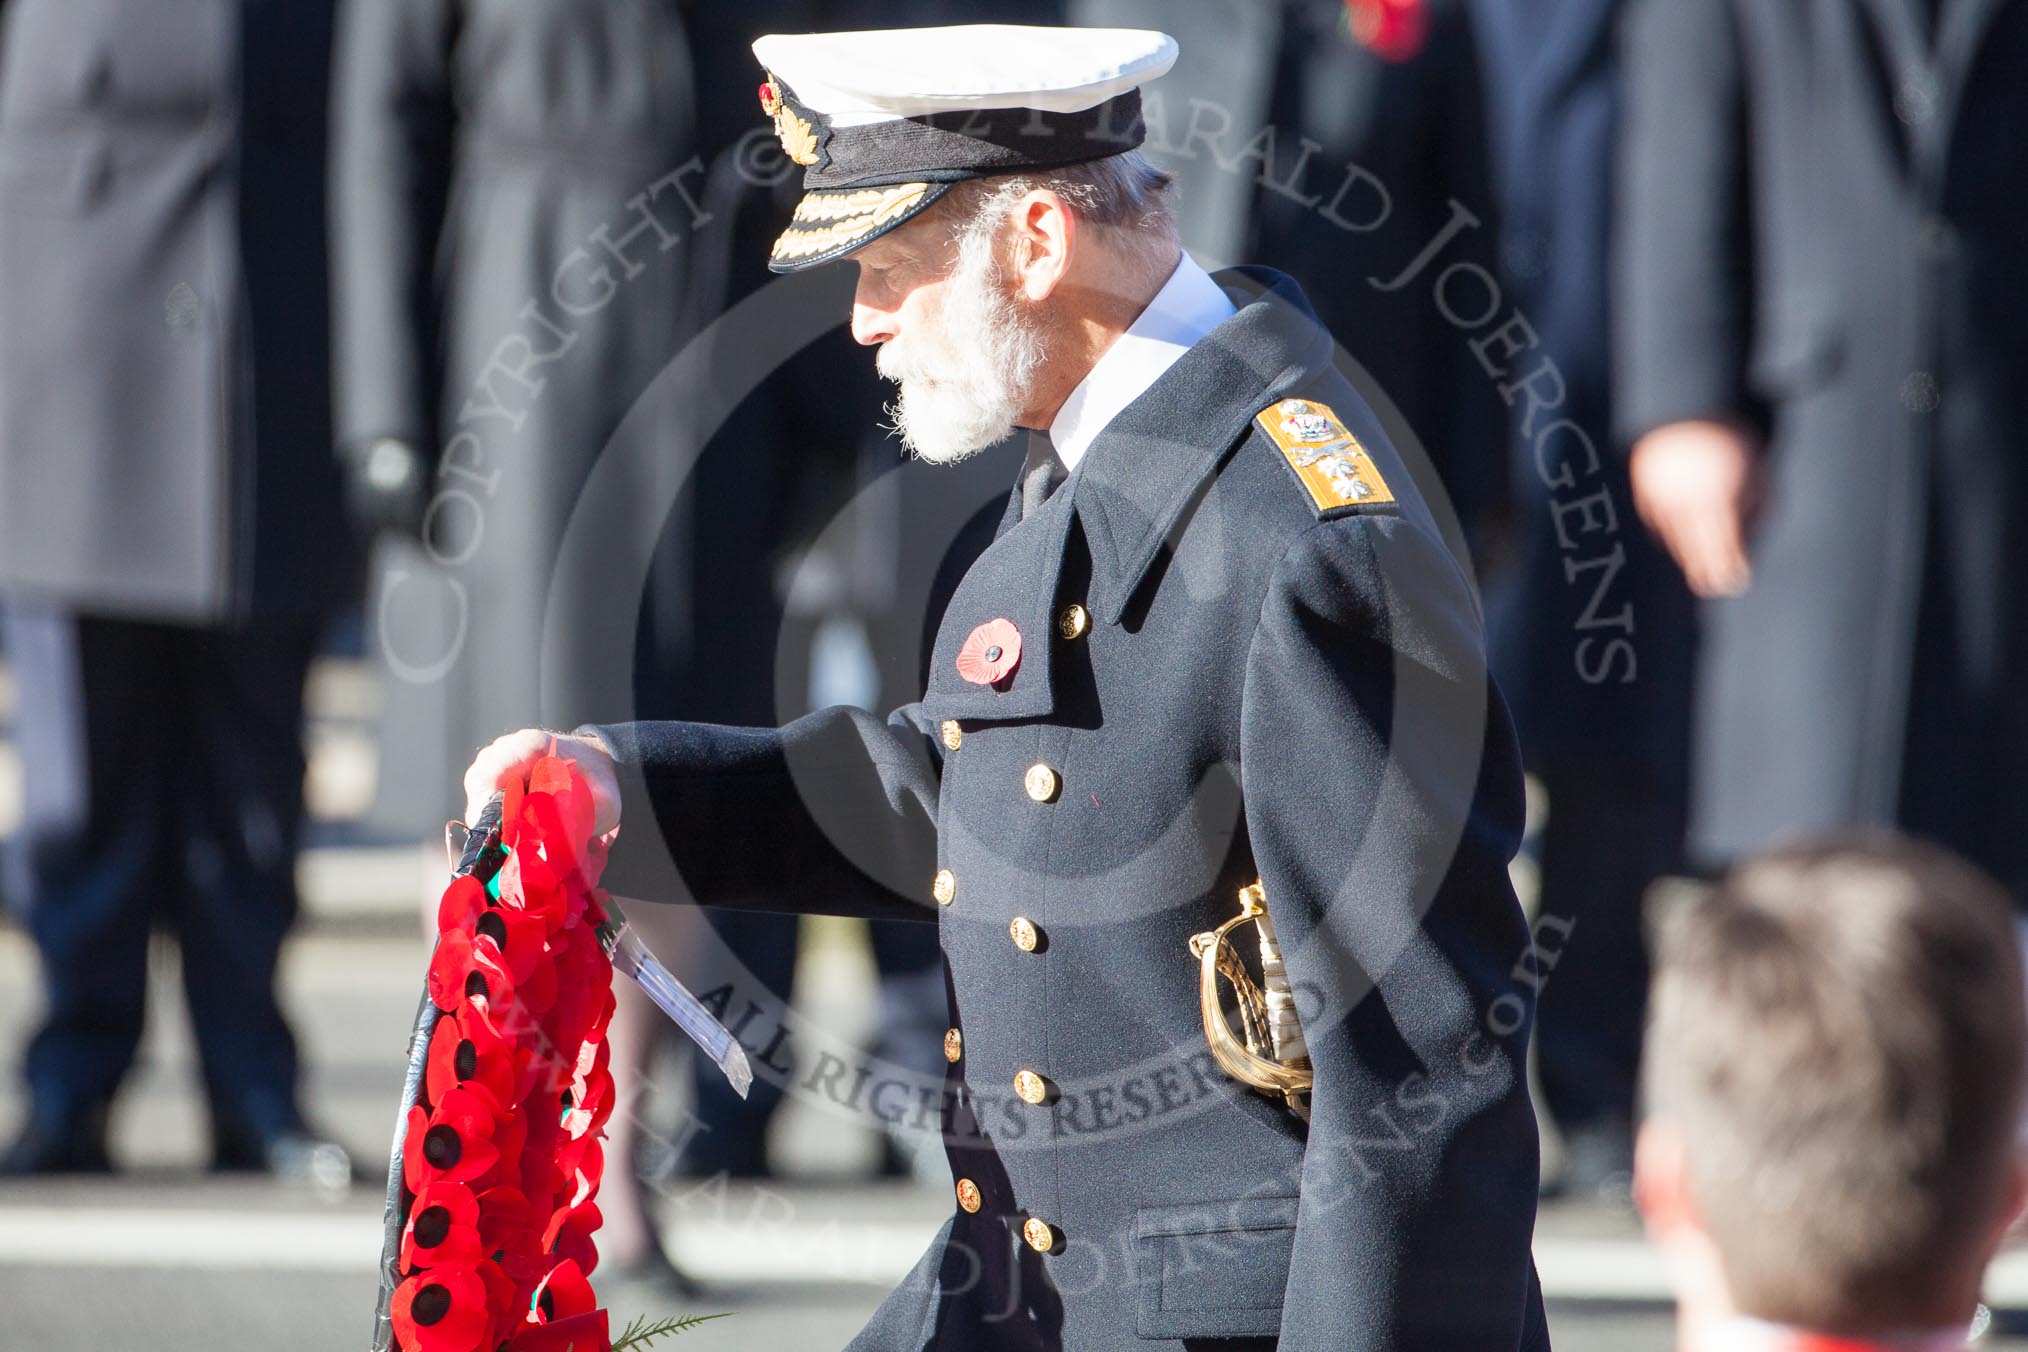 HRH Prince Michael of Kent, about to lay his wreath at the Cenotaph.